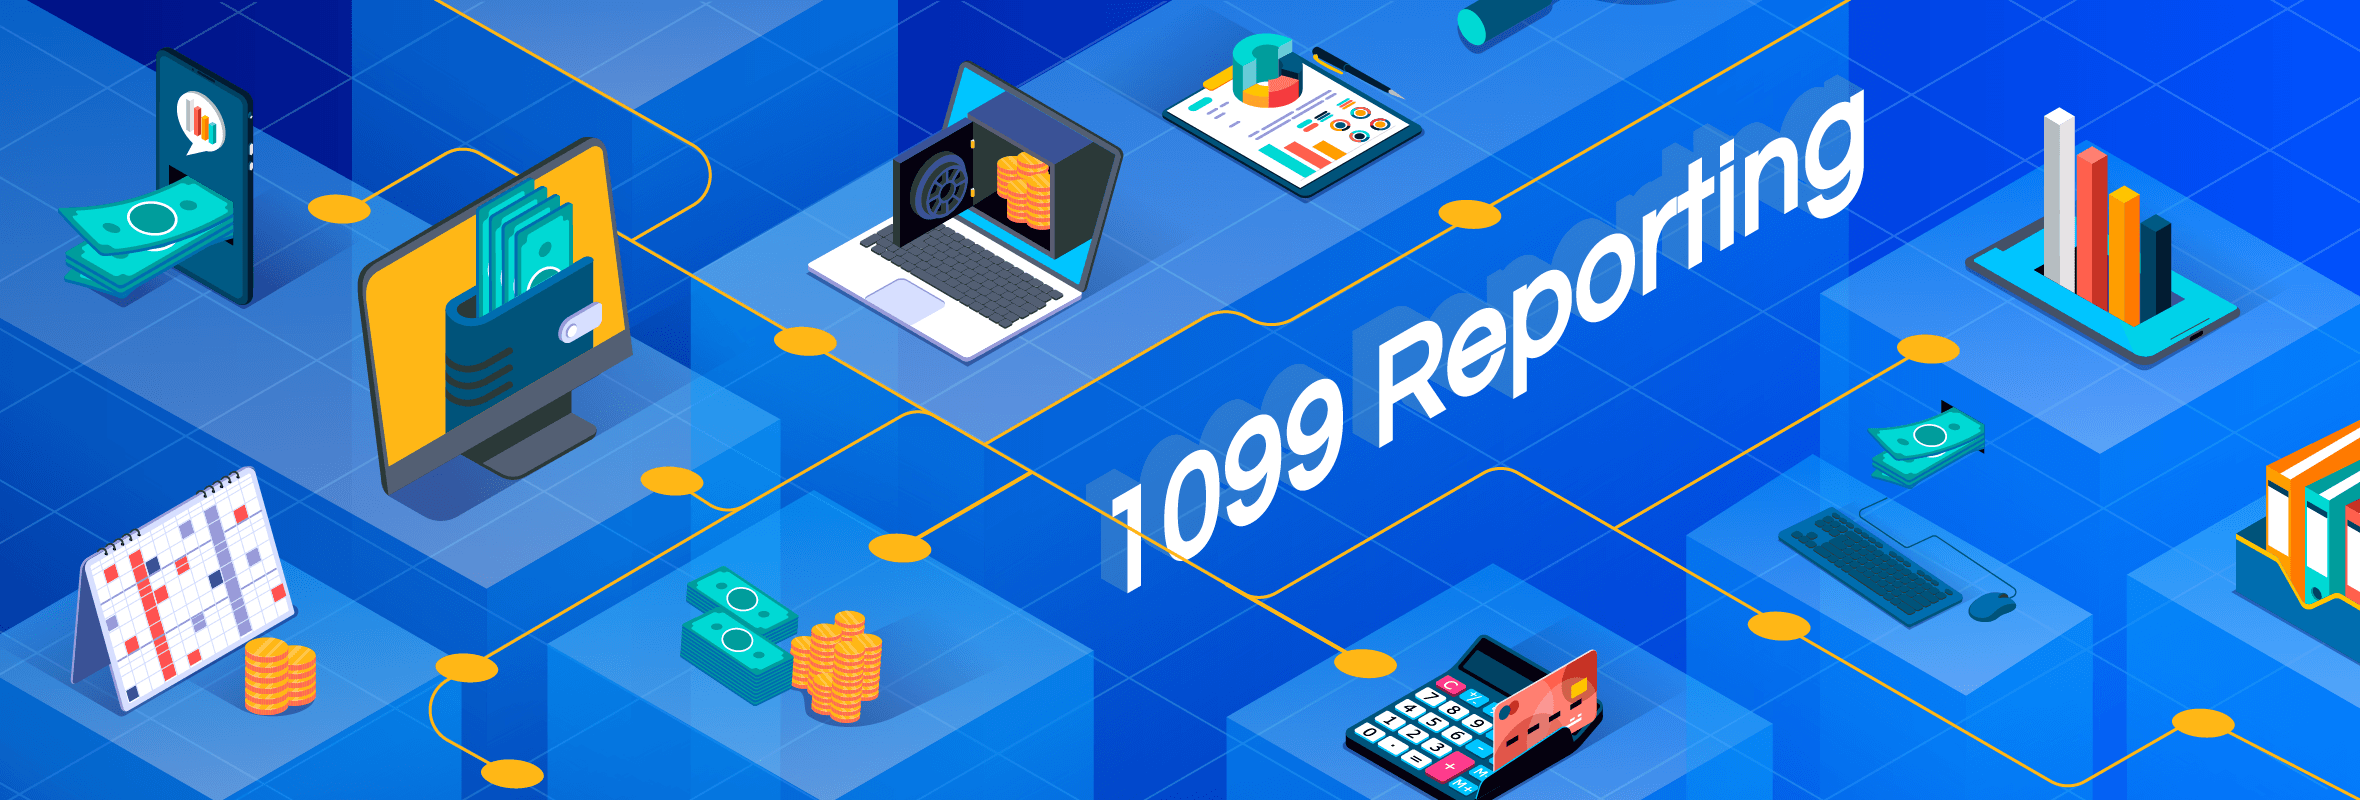 In 2020 the IRS released form 1099-NEC, a new form which will change the way 1099-MISC reporting has been handled for years.